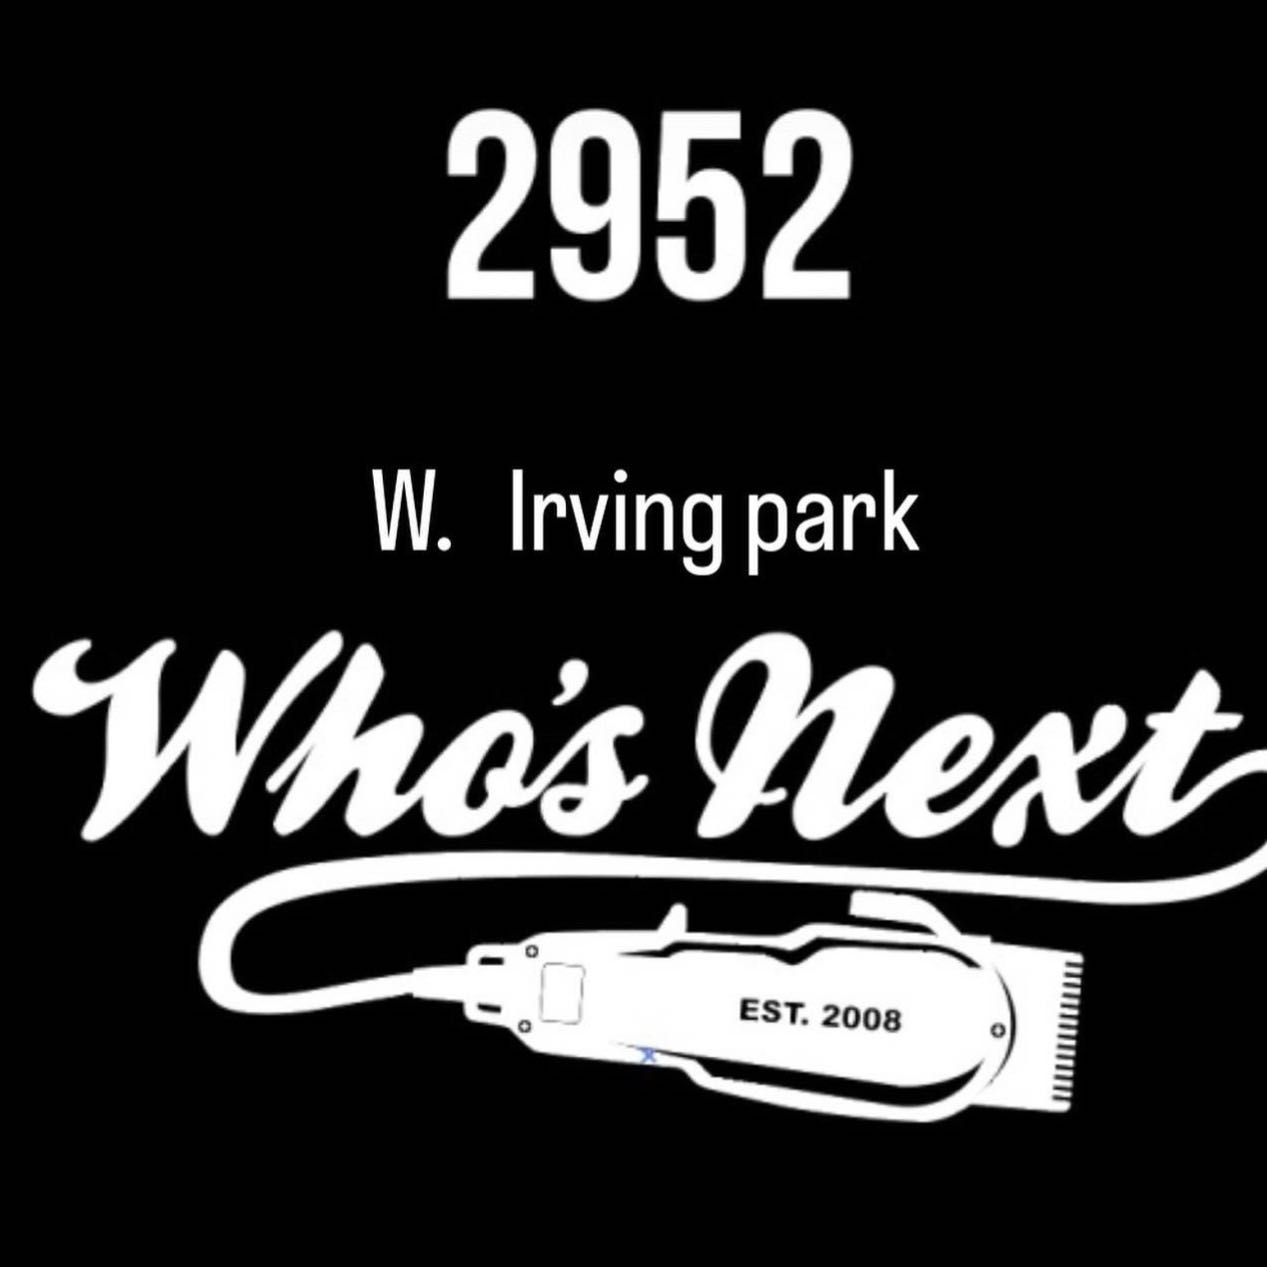 Who’sNext barbershop, 2952 w Irving park RD, Chicago, 60618